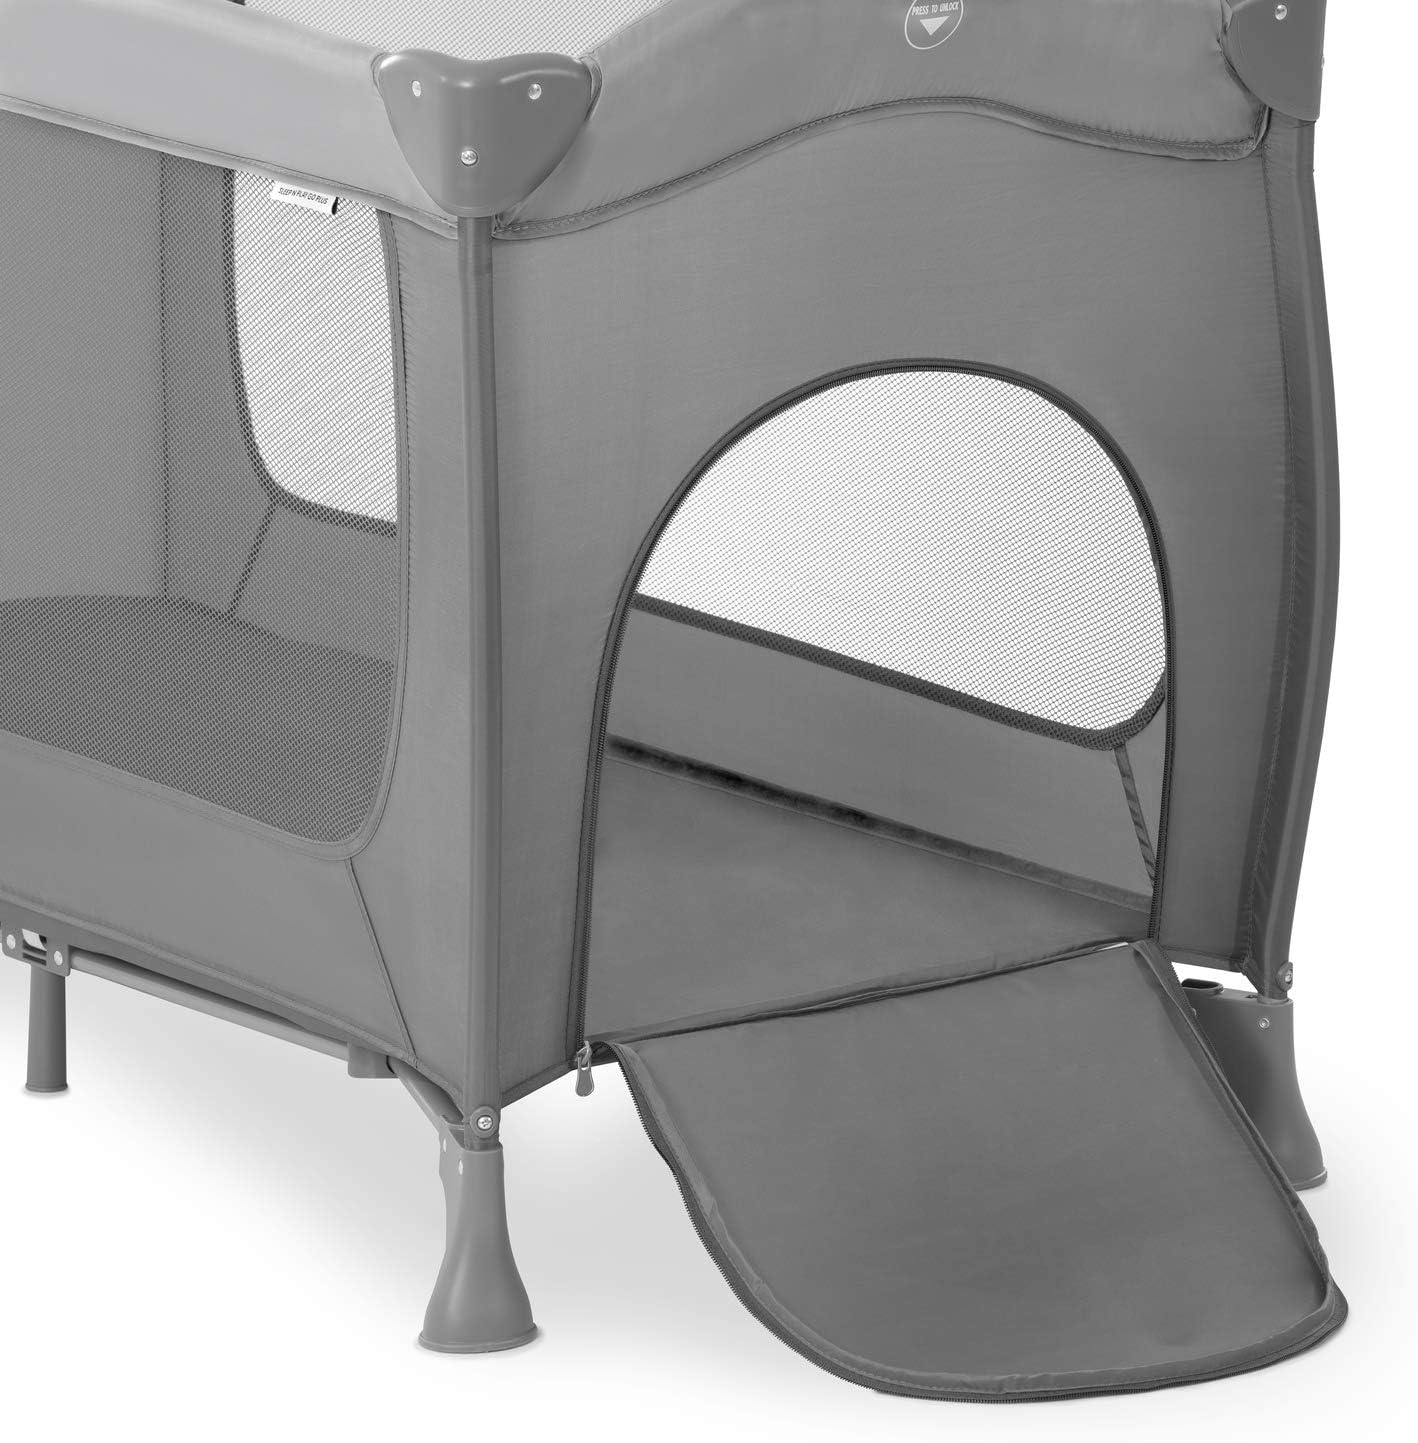 Hauck Sleep N Play Go Plus 4-Part Travel Cot from Birth to 15 kg, with Side Exit, Wheels, Foldable, Carry Bag